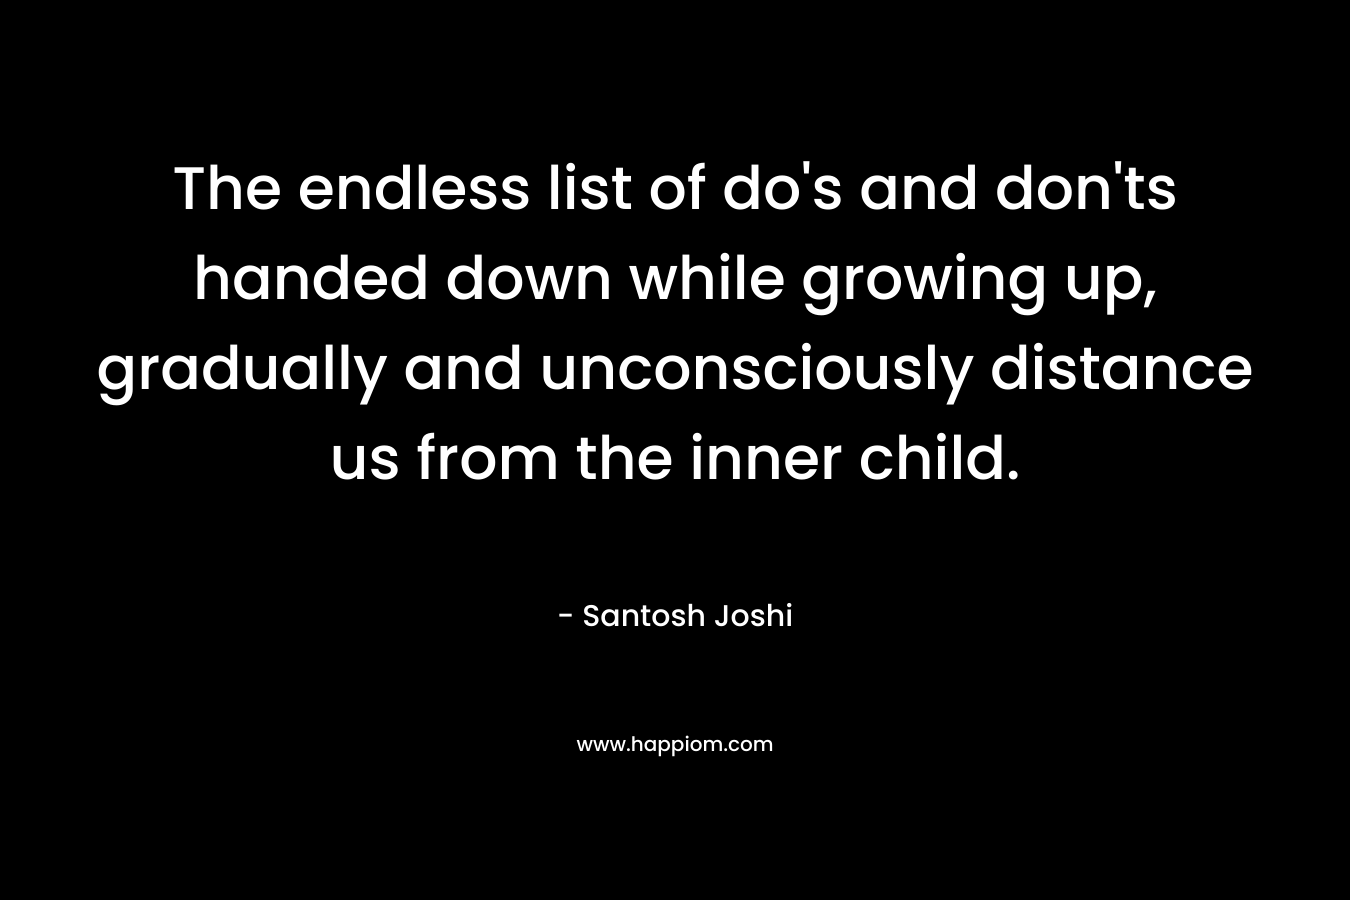 The endless list of do's and don'ts handed down while growing up, gradually and unconsciously distance us from the inner child.